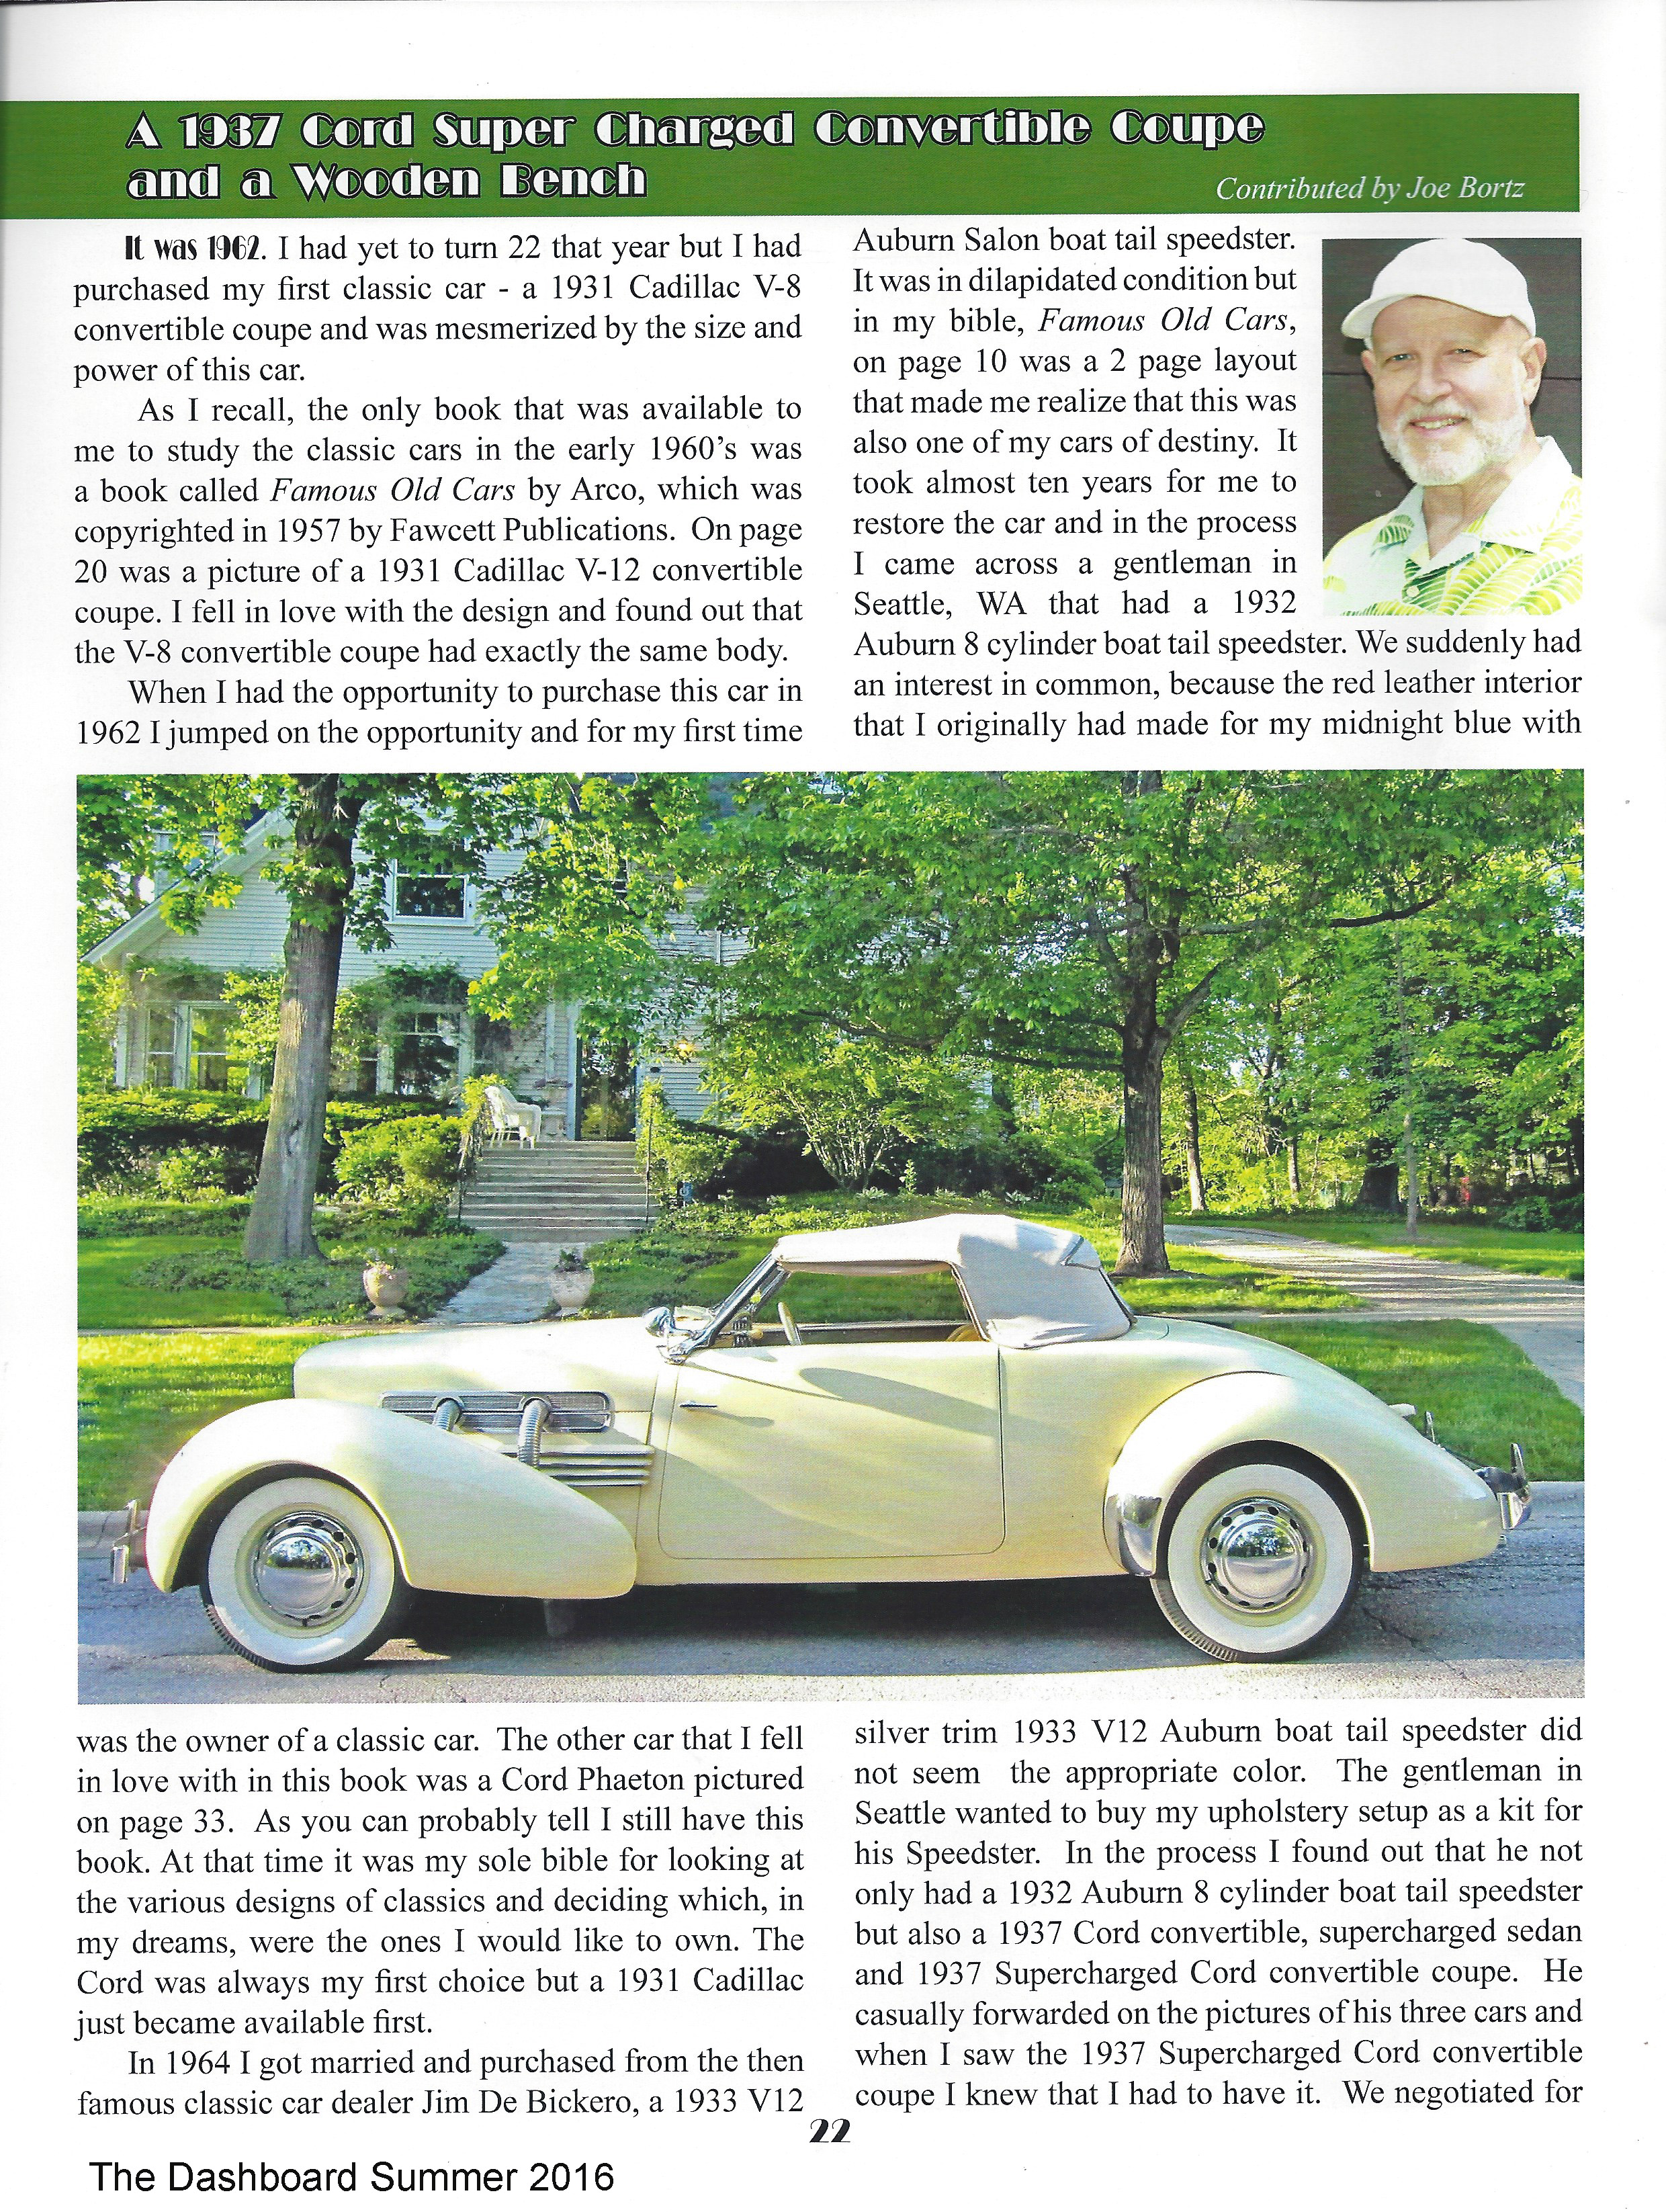 1937 cord article